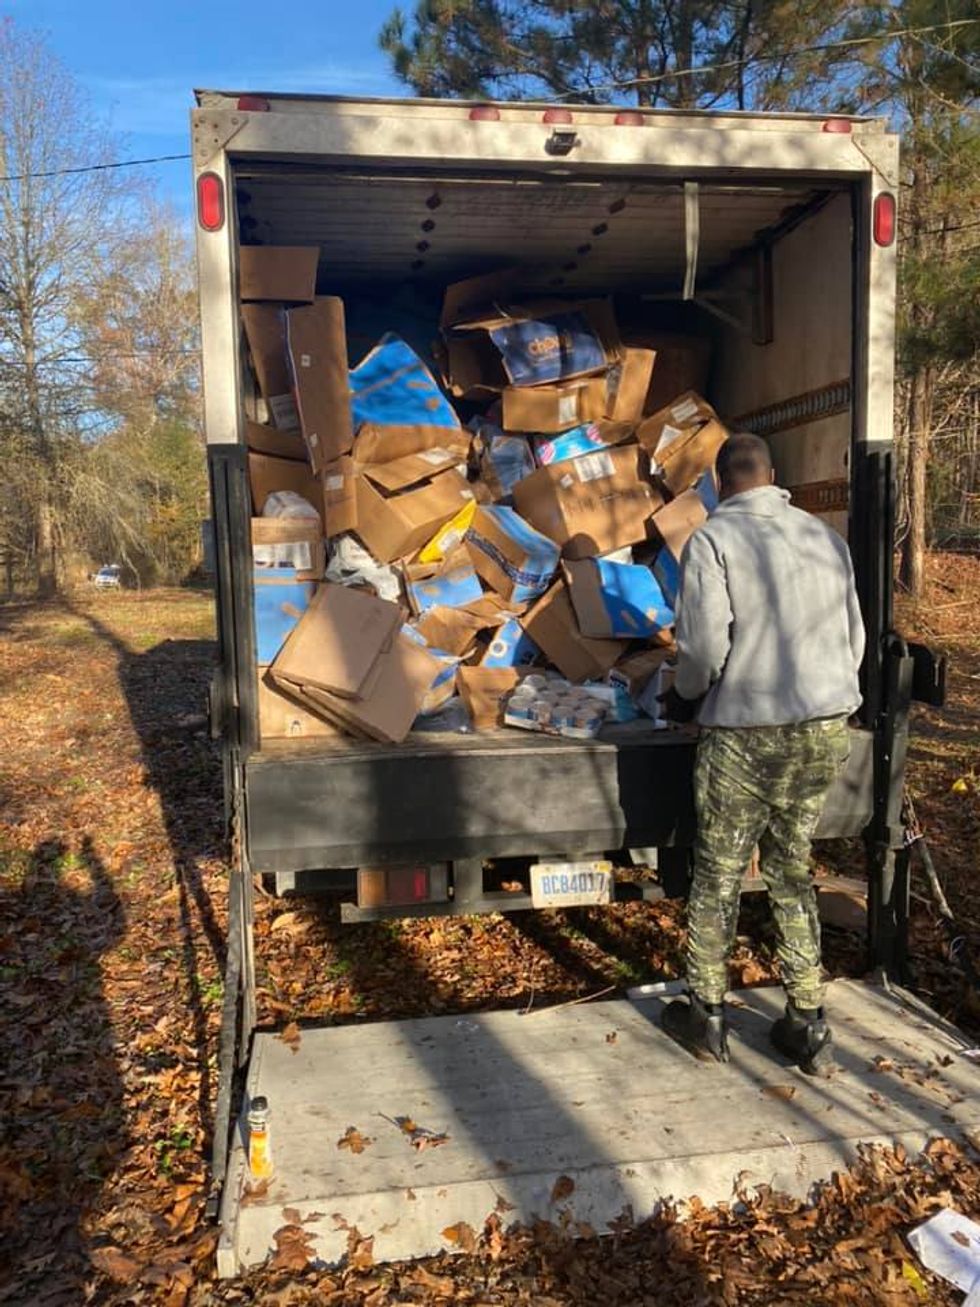 Packages being reloaded into a truck